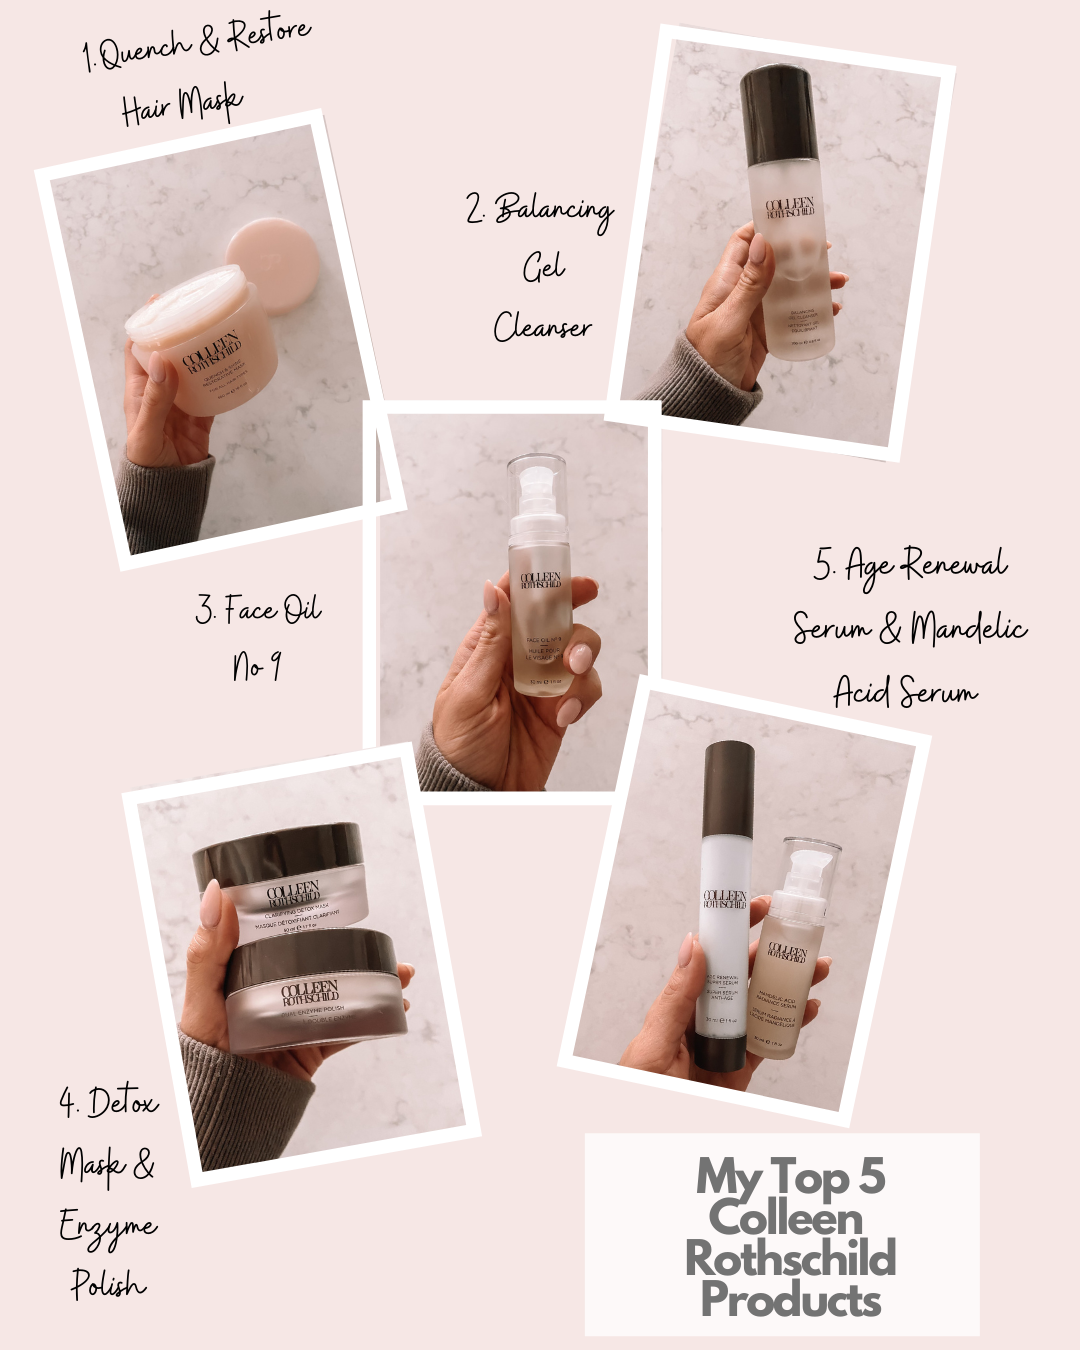 My Top 5 Colleen Rothschild Products